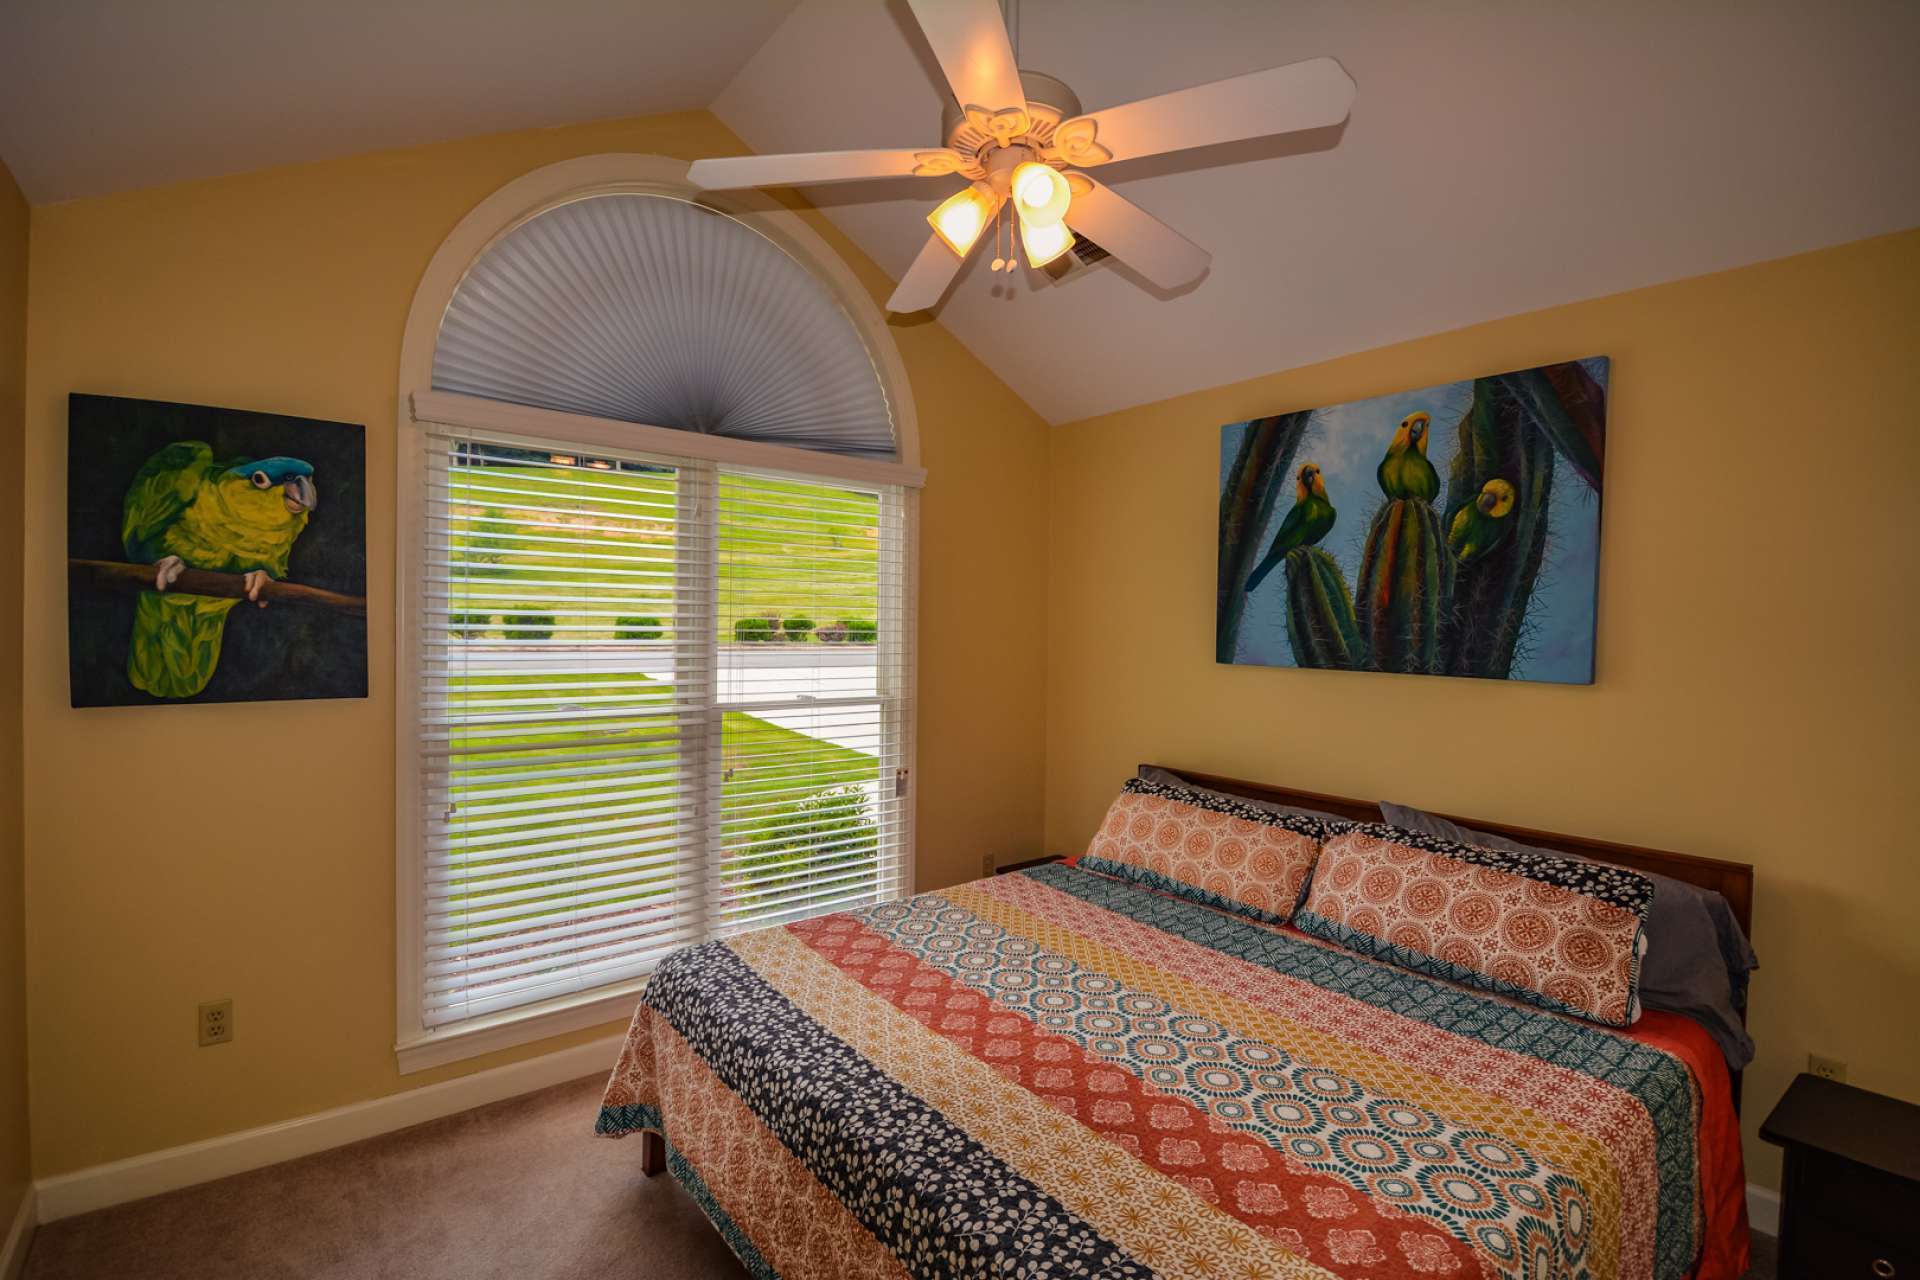 There are two nicely sized additional guest bedrooms that share a full bath.